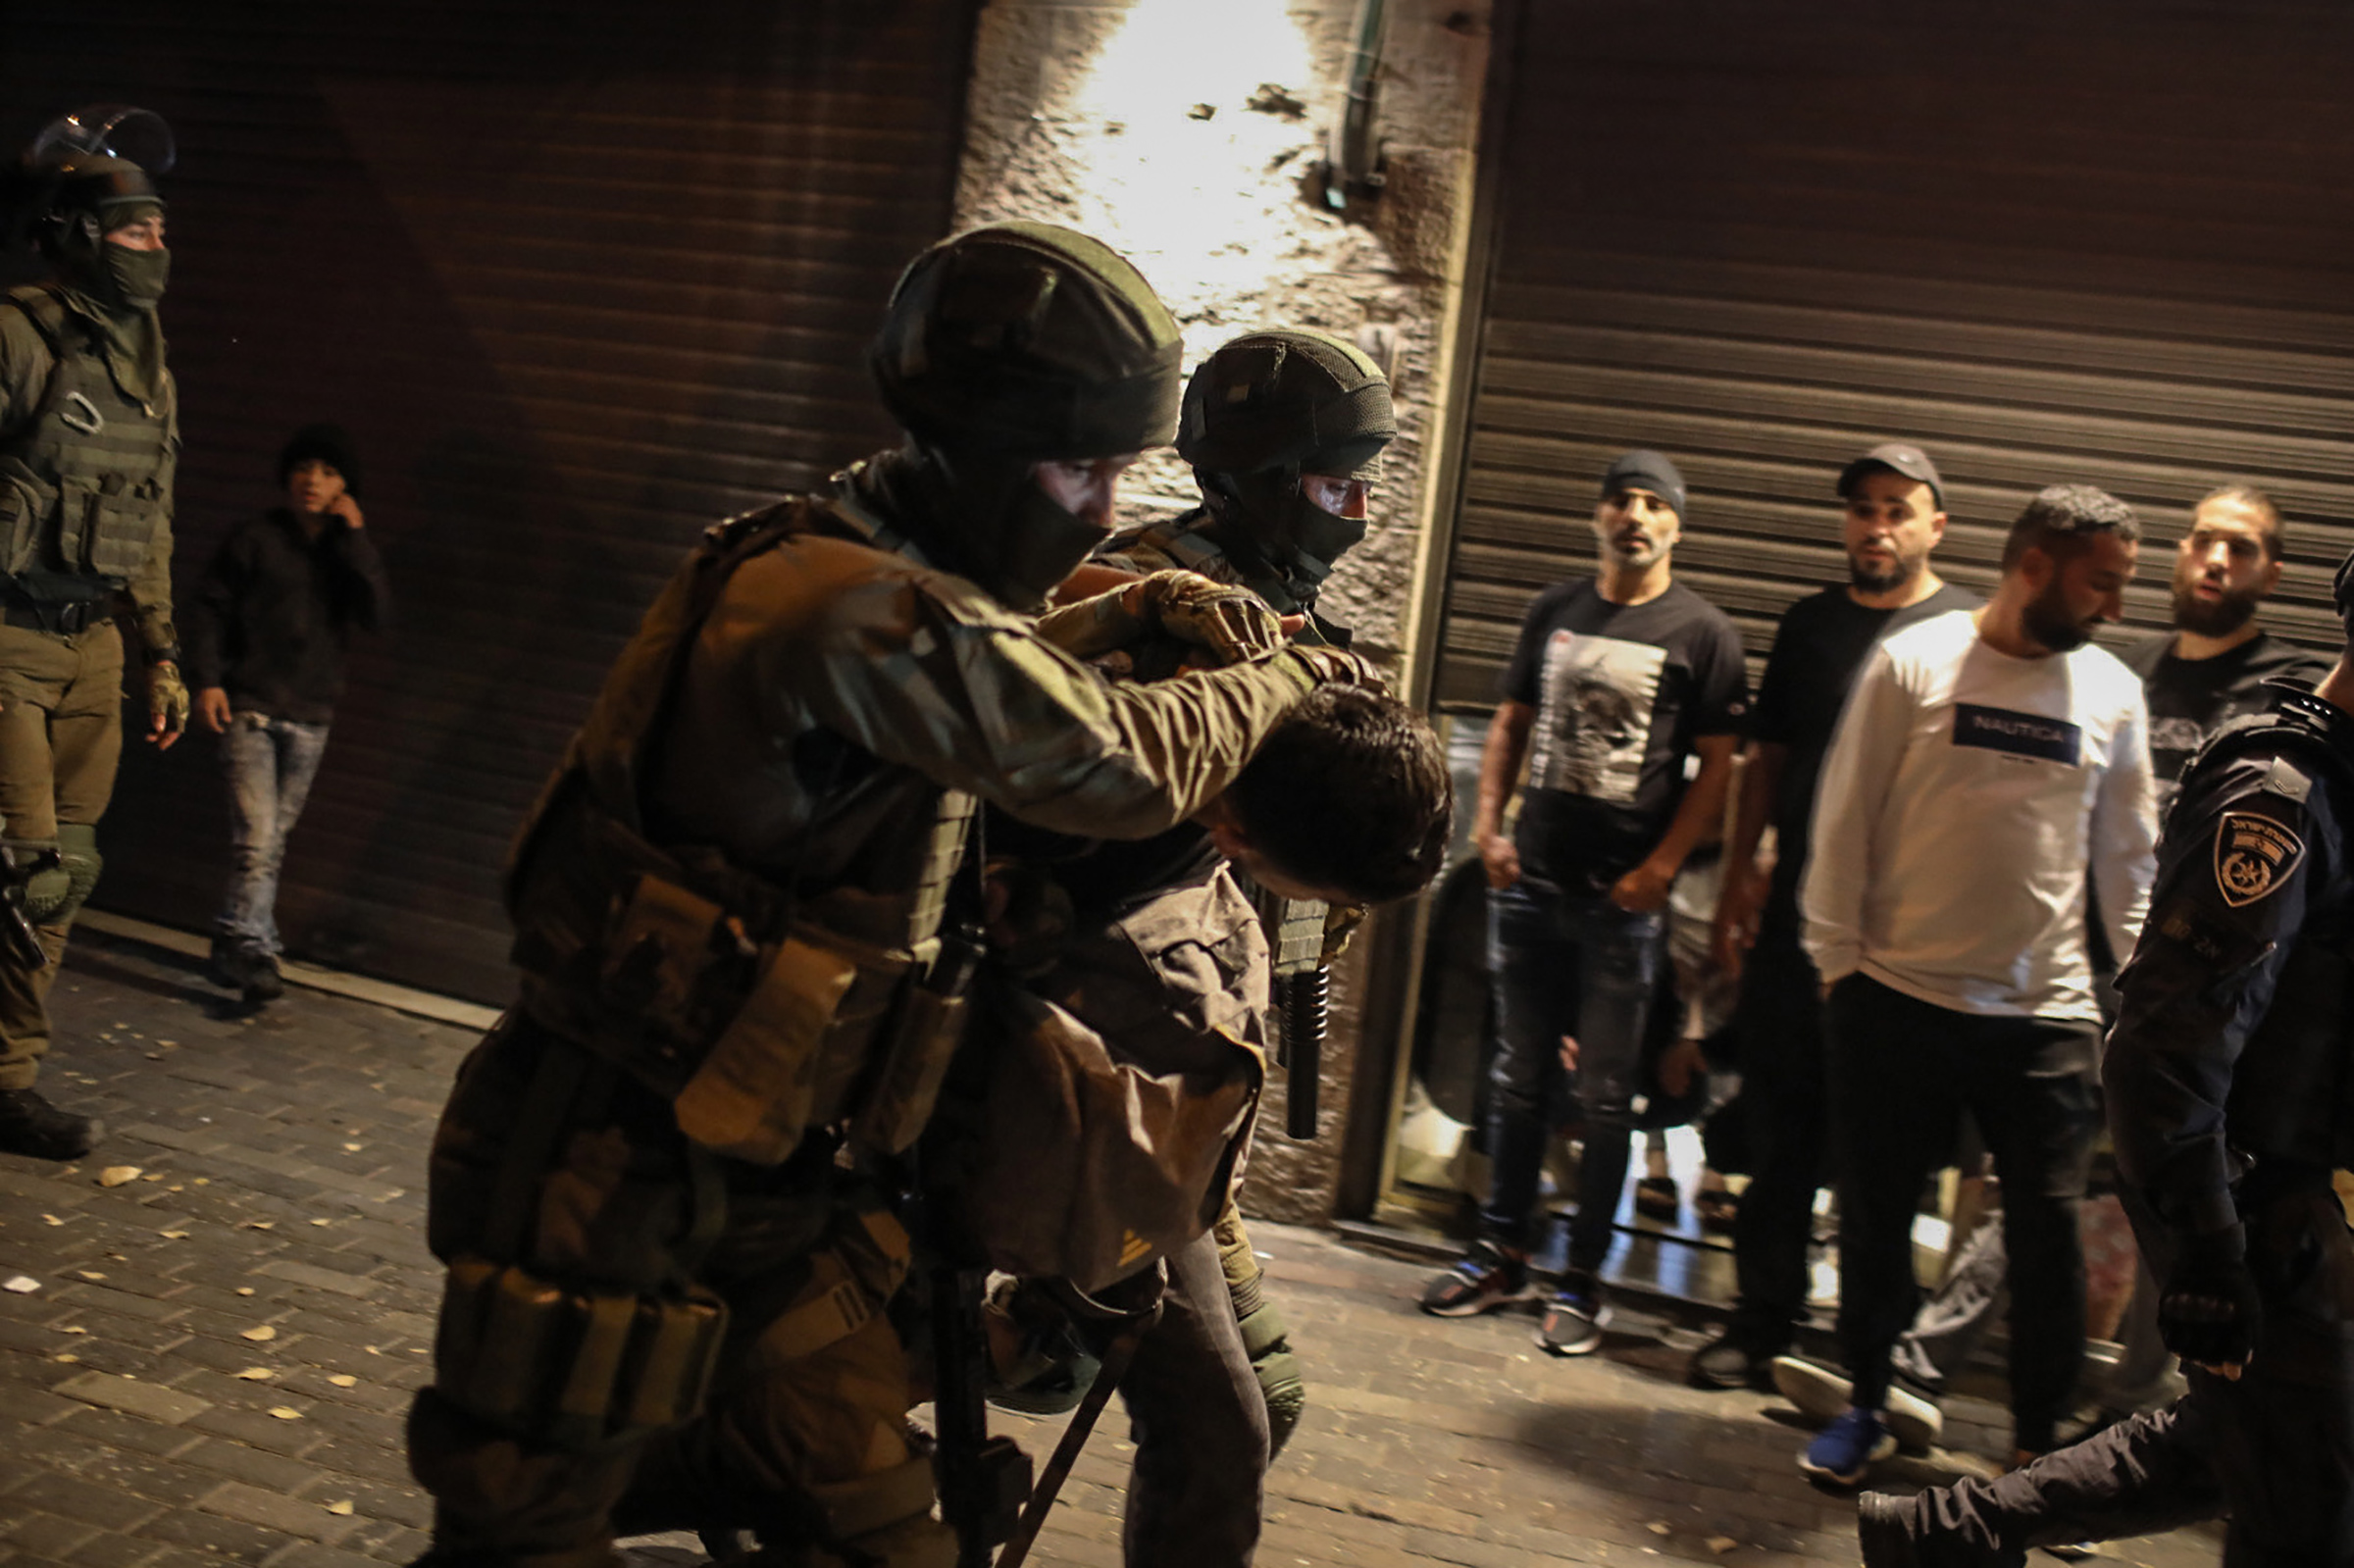 Israeli security forces arrest a man during a demonstration against the planned eviction process for the Palestinians in the Sheikh Jarrah neighbourhood of Jerusalem, on May 7, 2021. (Ilia Yefimovich—picture alliance/Getty Images)